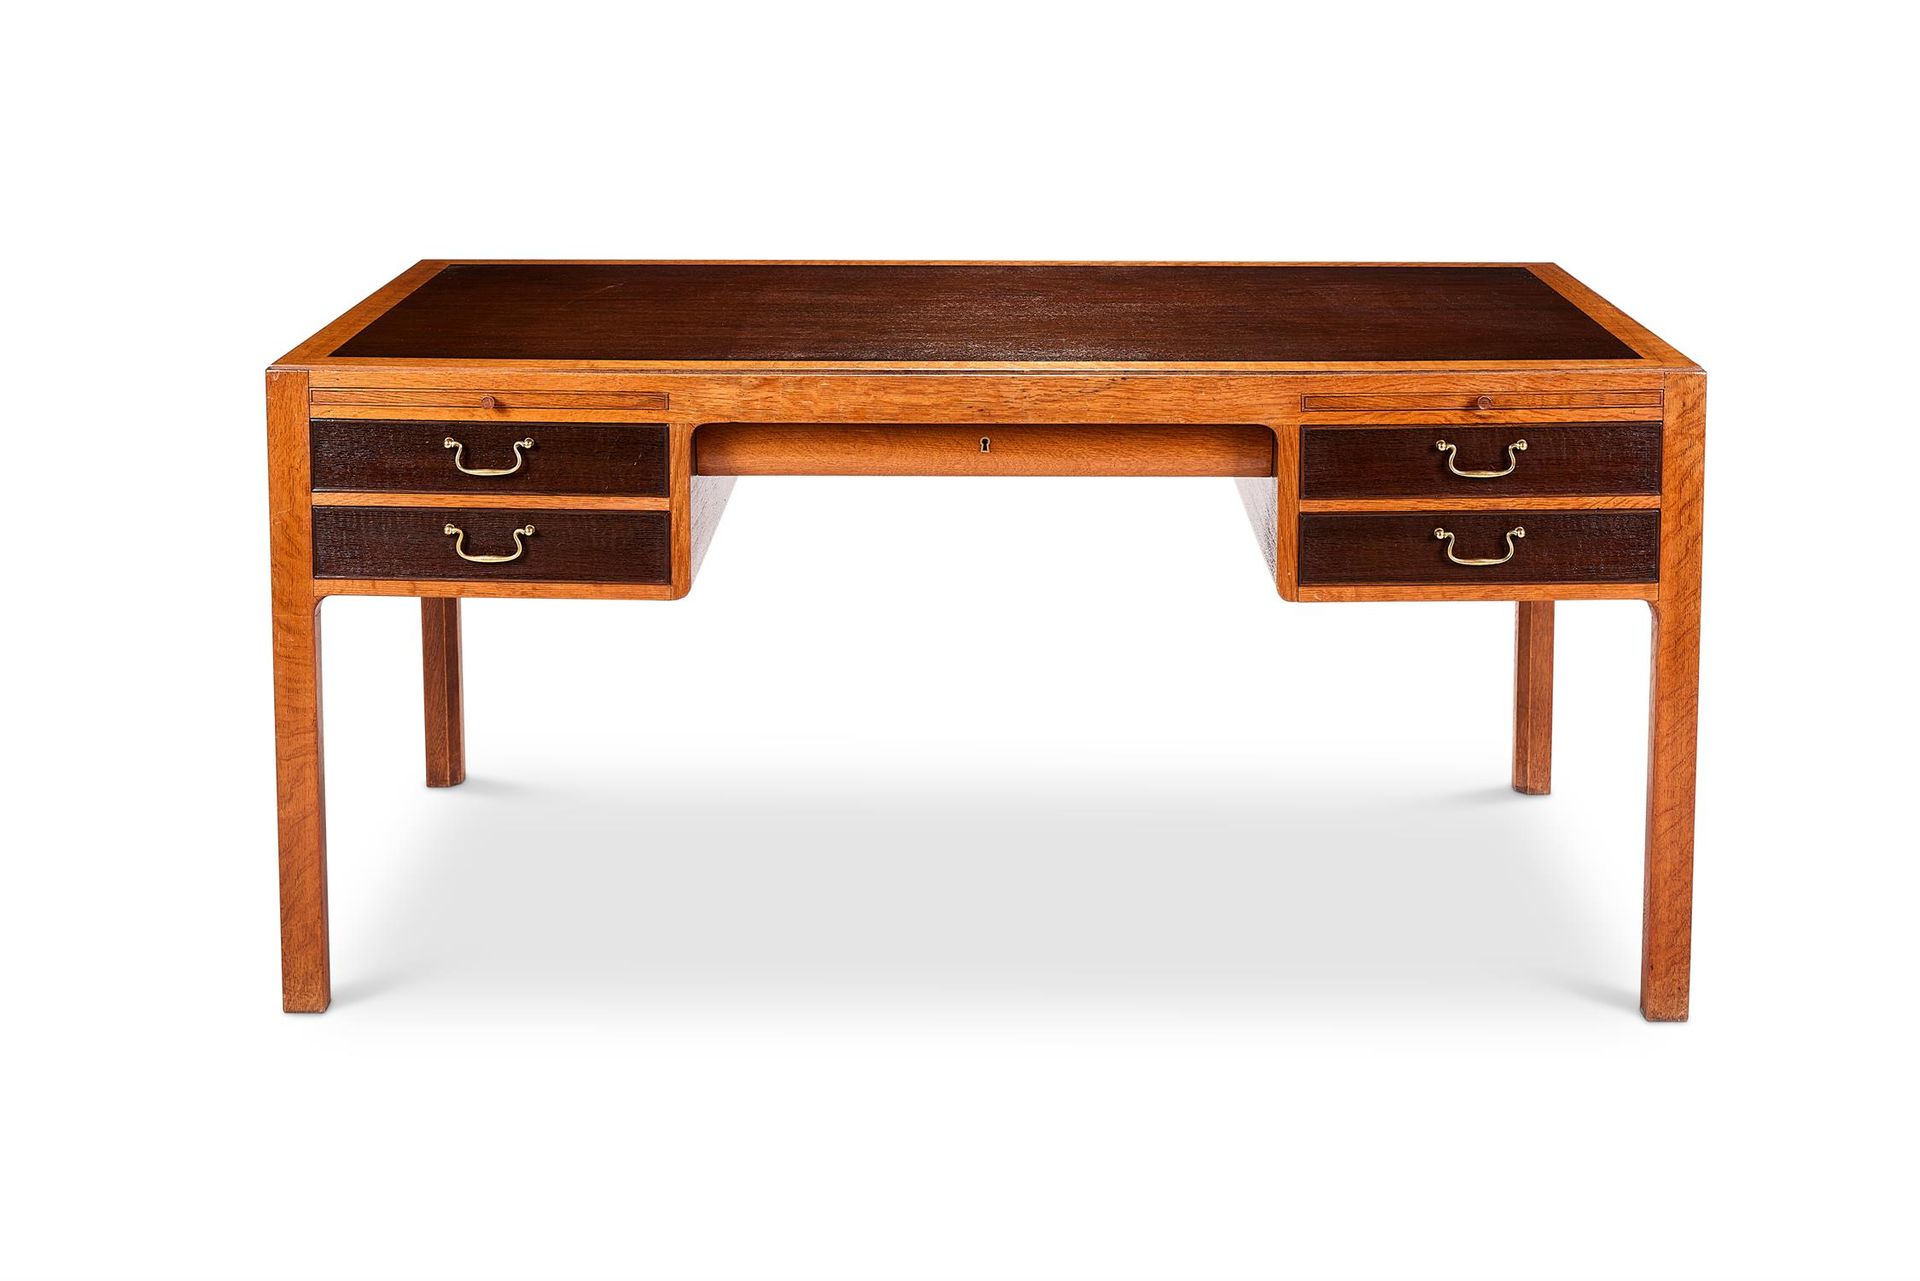 A DANISH OAK DESK ATTRIBUTED TO ERNST KUHN (1890-1948), RETAILED BY NORMINA BURE&hellip;